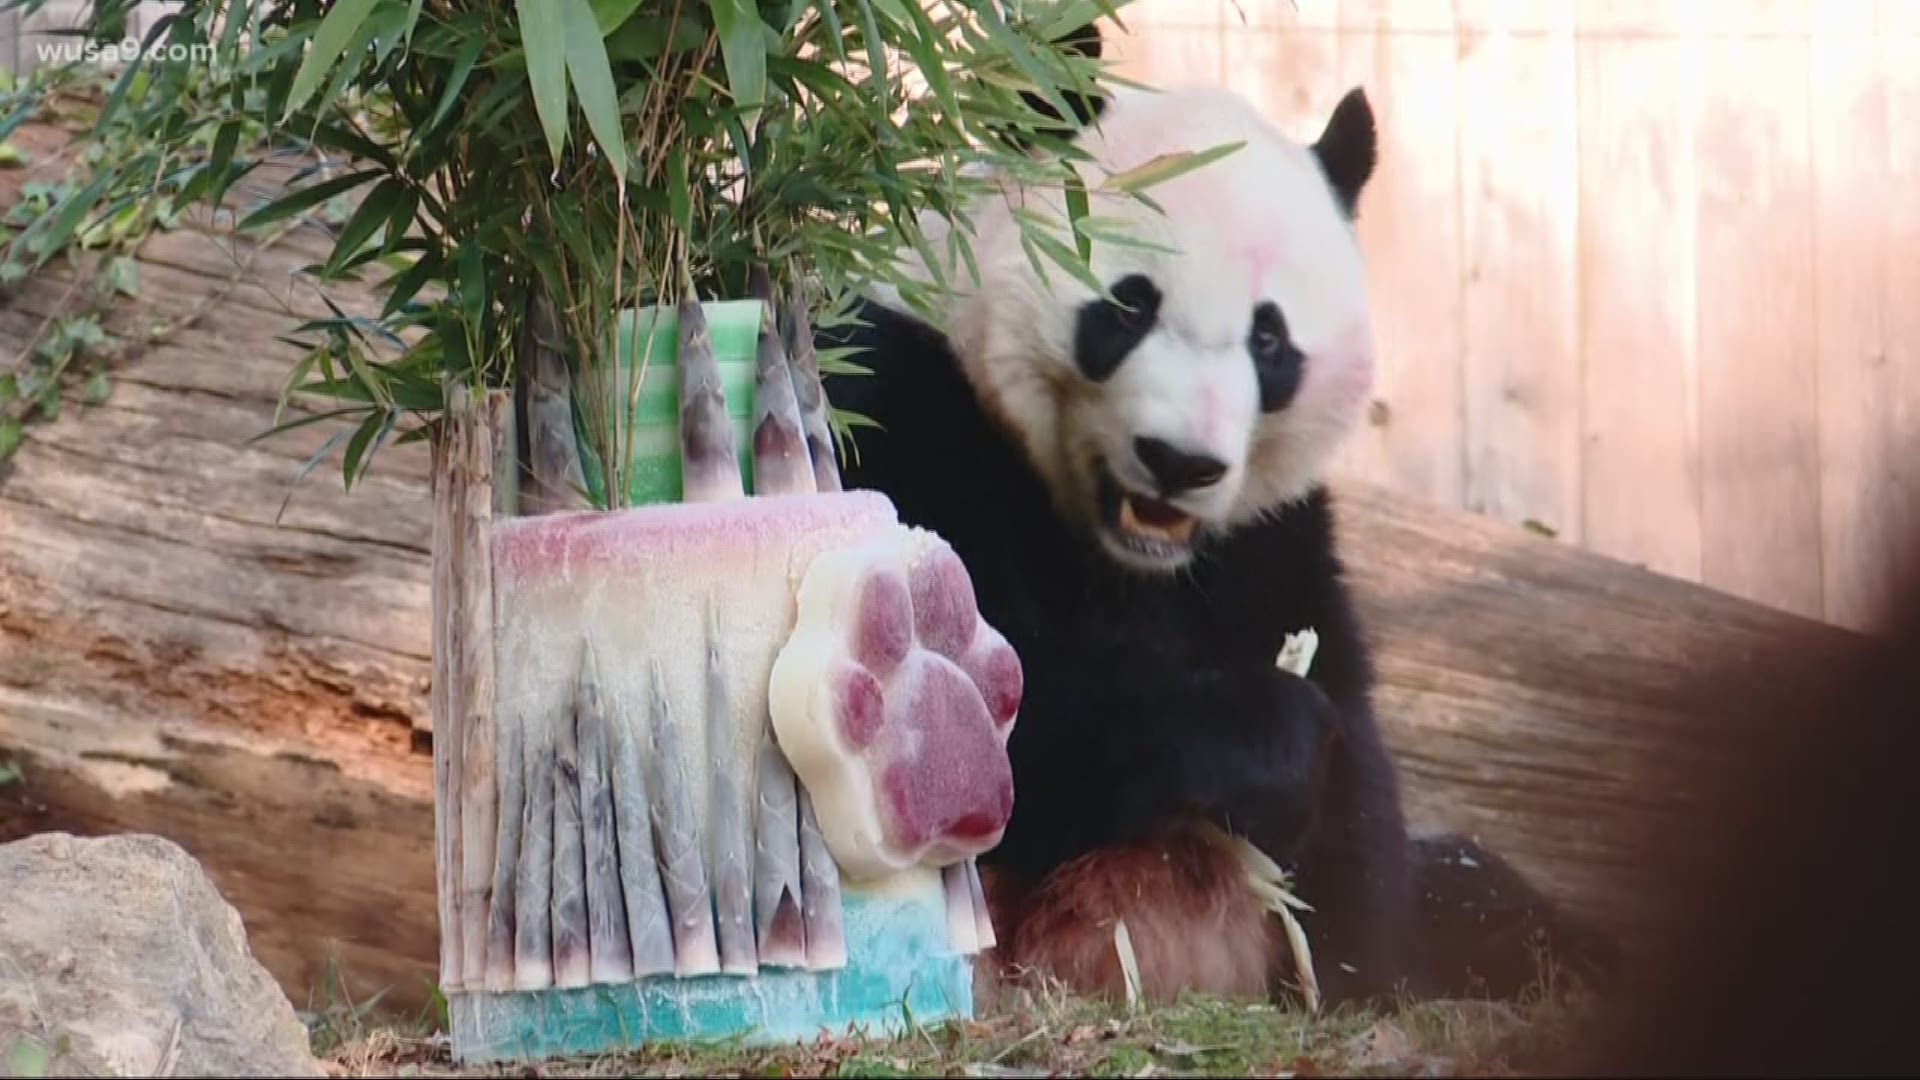 The beloved panda will leave DC for China on Tuesday as part of the US-China panda diplomacy program.